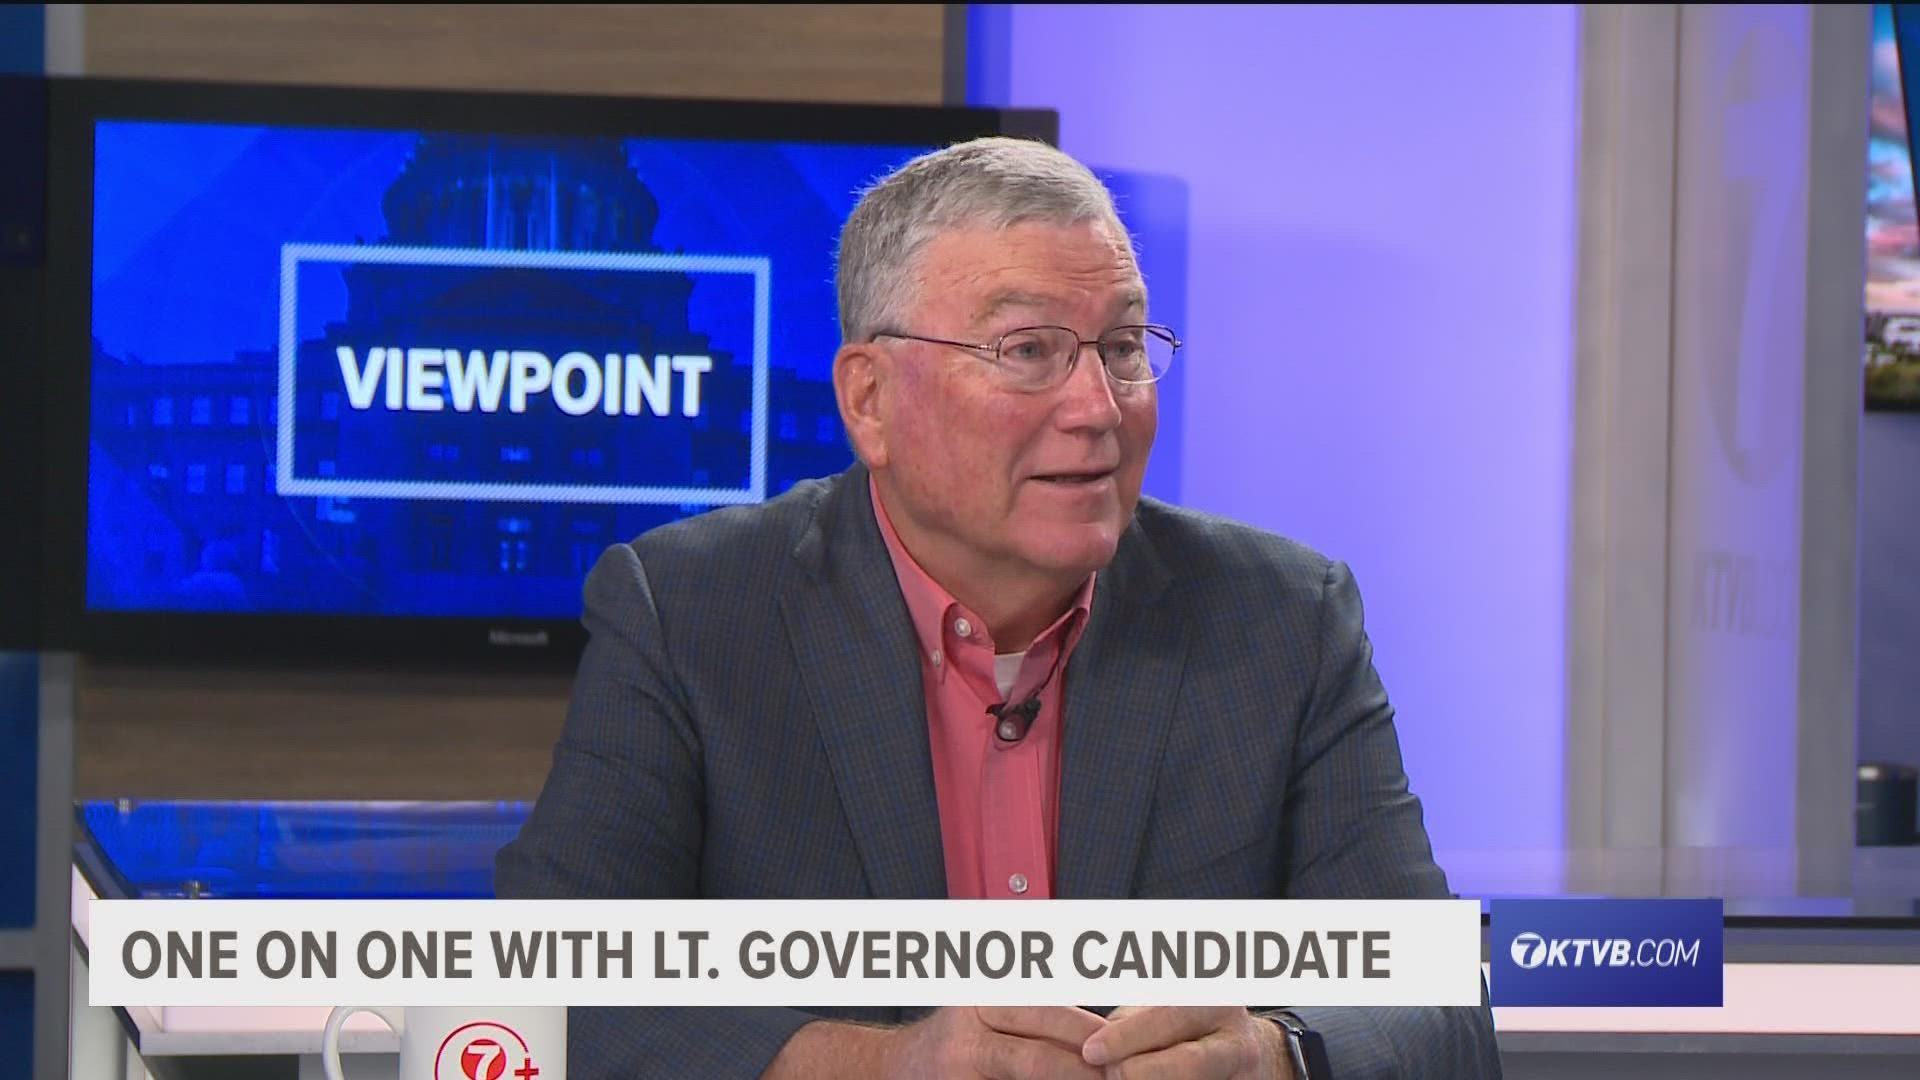 Part 1 of KTVB's "Viewpoint" series on the Idaho lieutenant governor's race features Bedke, a Republican who's currently Idaho Speaker of the House.